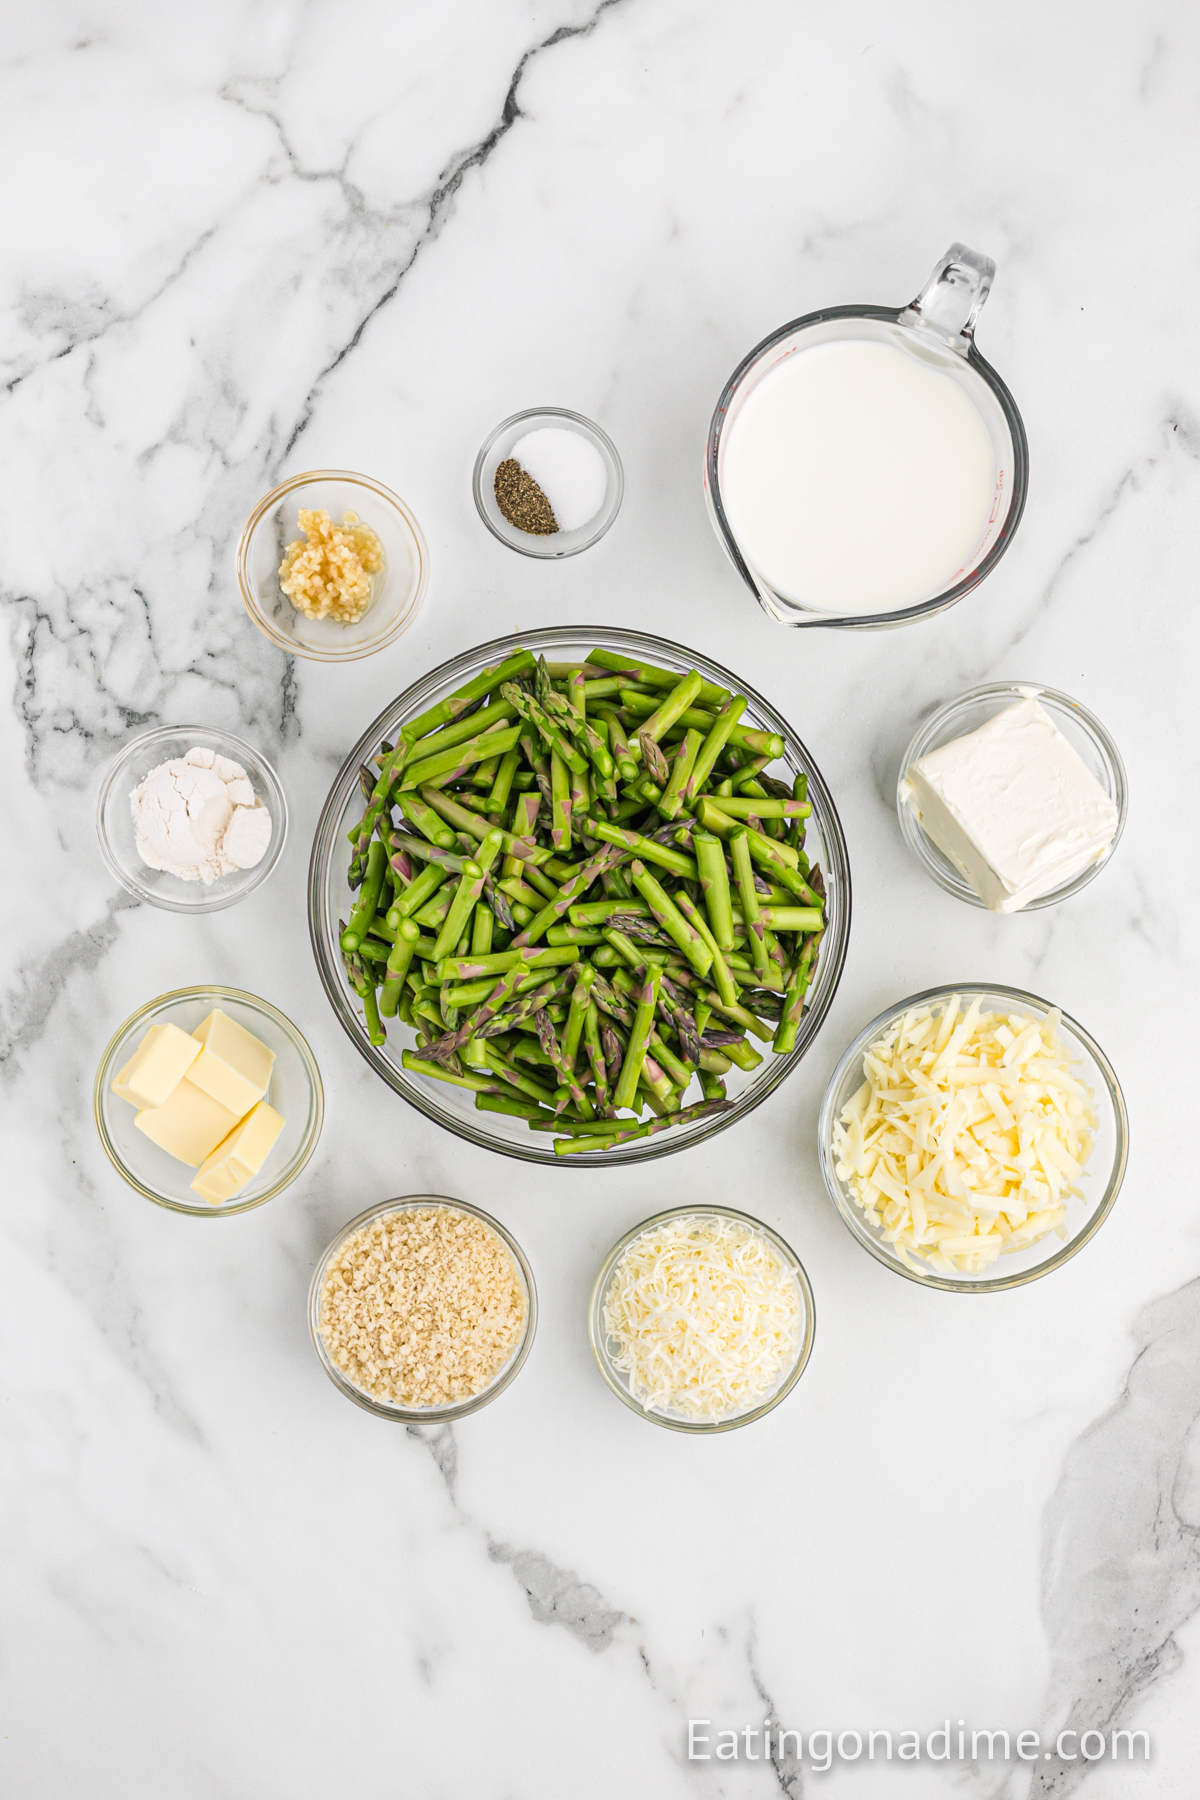 Ingredients for asparagus casserole